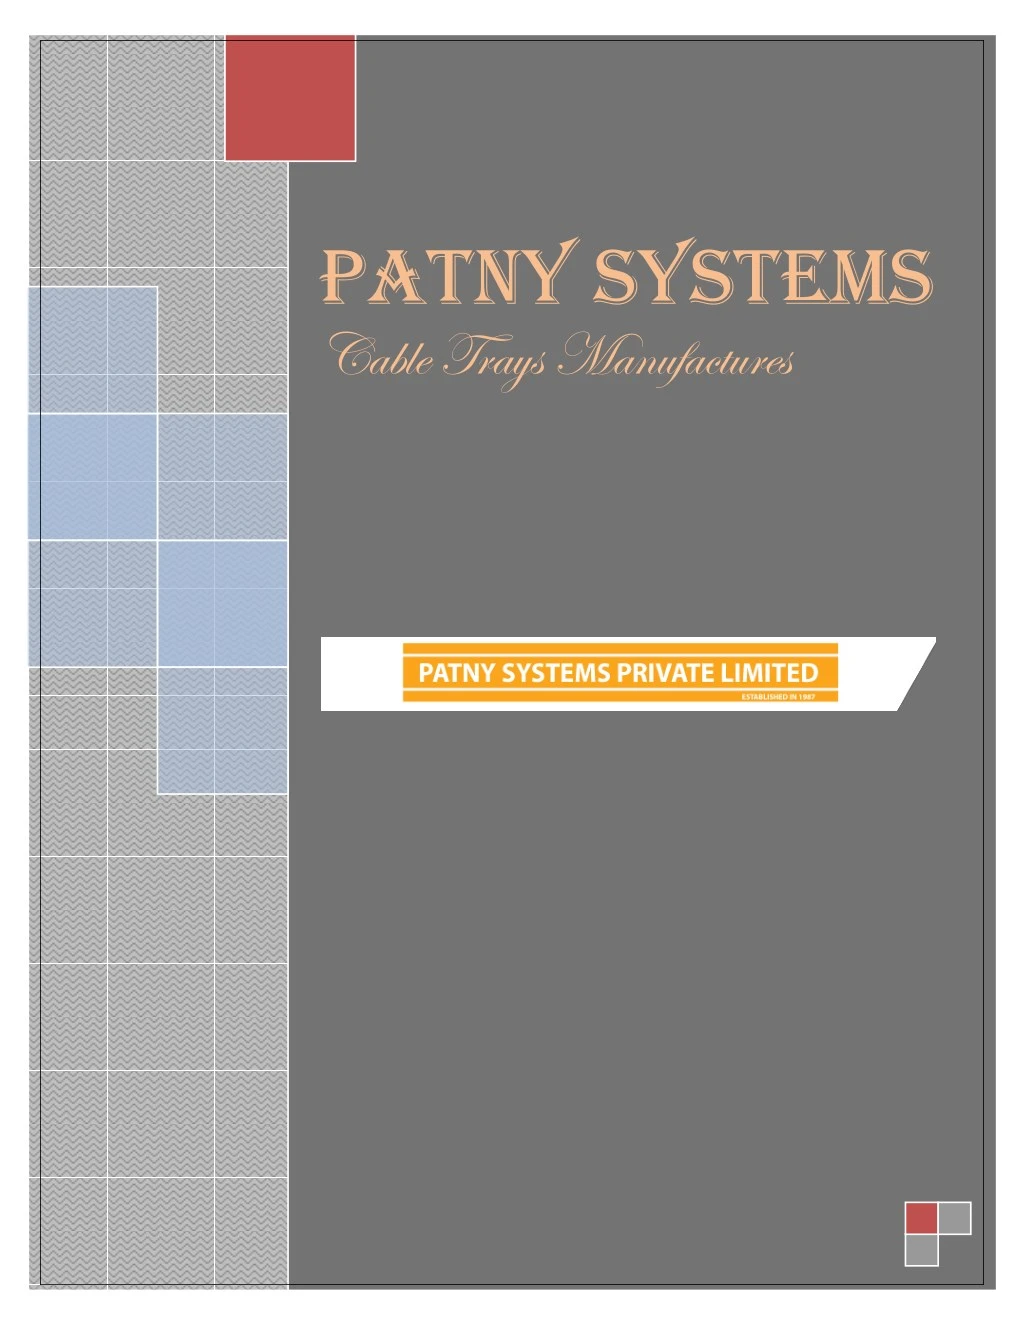 patny systems cable trays manufactures